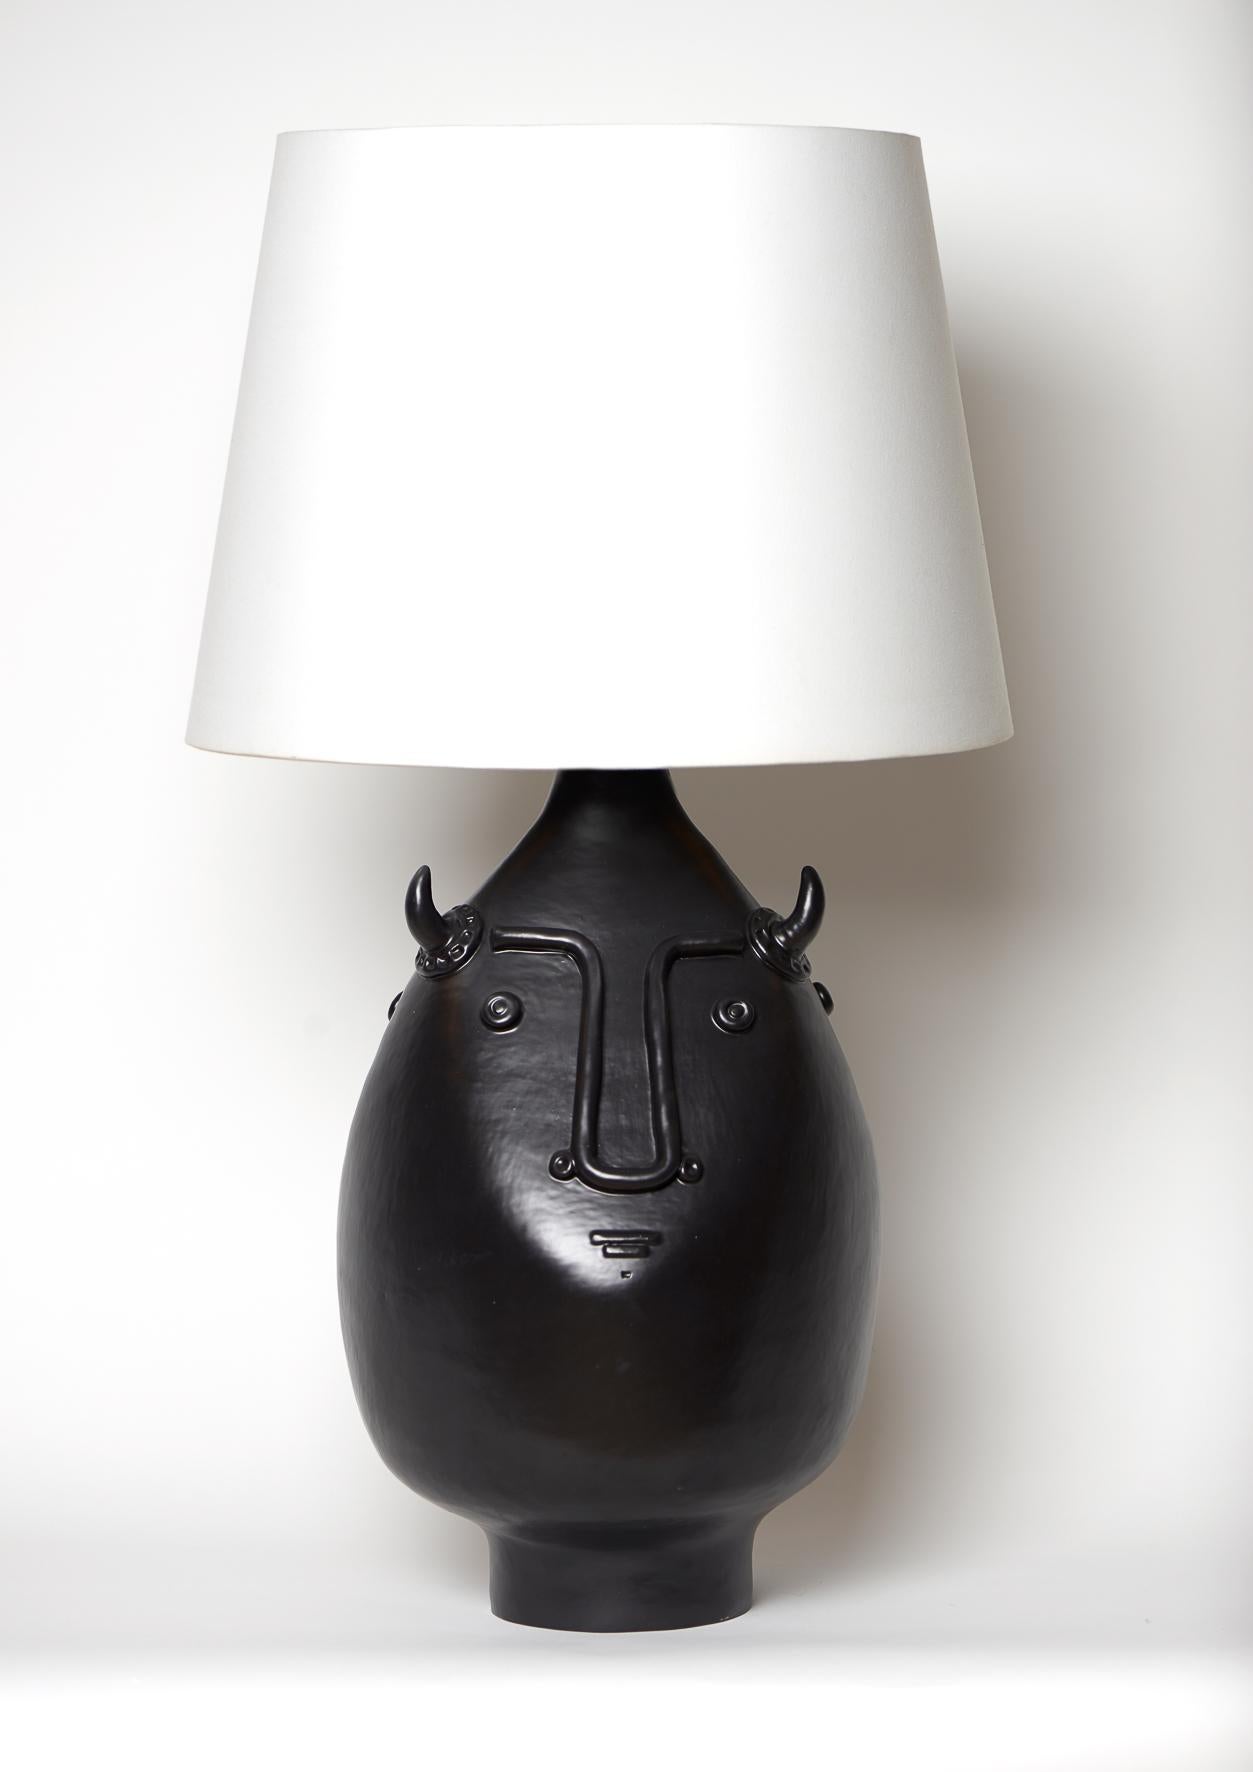 Hand-sculpted ceramic lamp base or sculpture with 3 Toro faces

One of a kind stoneware piece glazed in black mat enamel signed by the French ceramicists Dalo 

The height dimension is for the ceramic sculpture solely 

Note to international